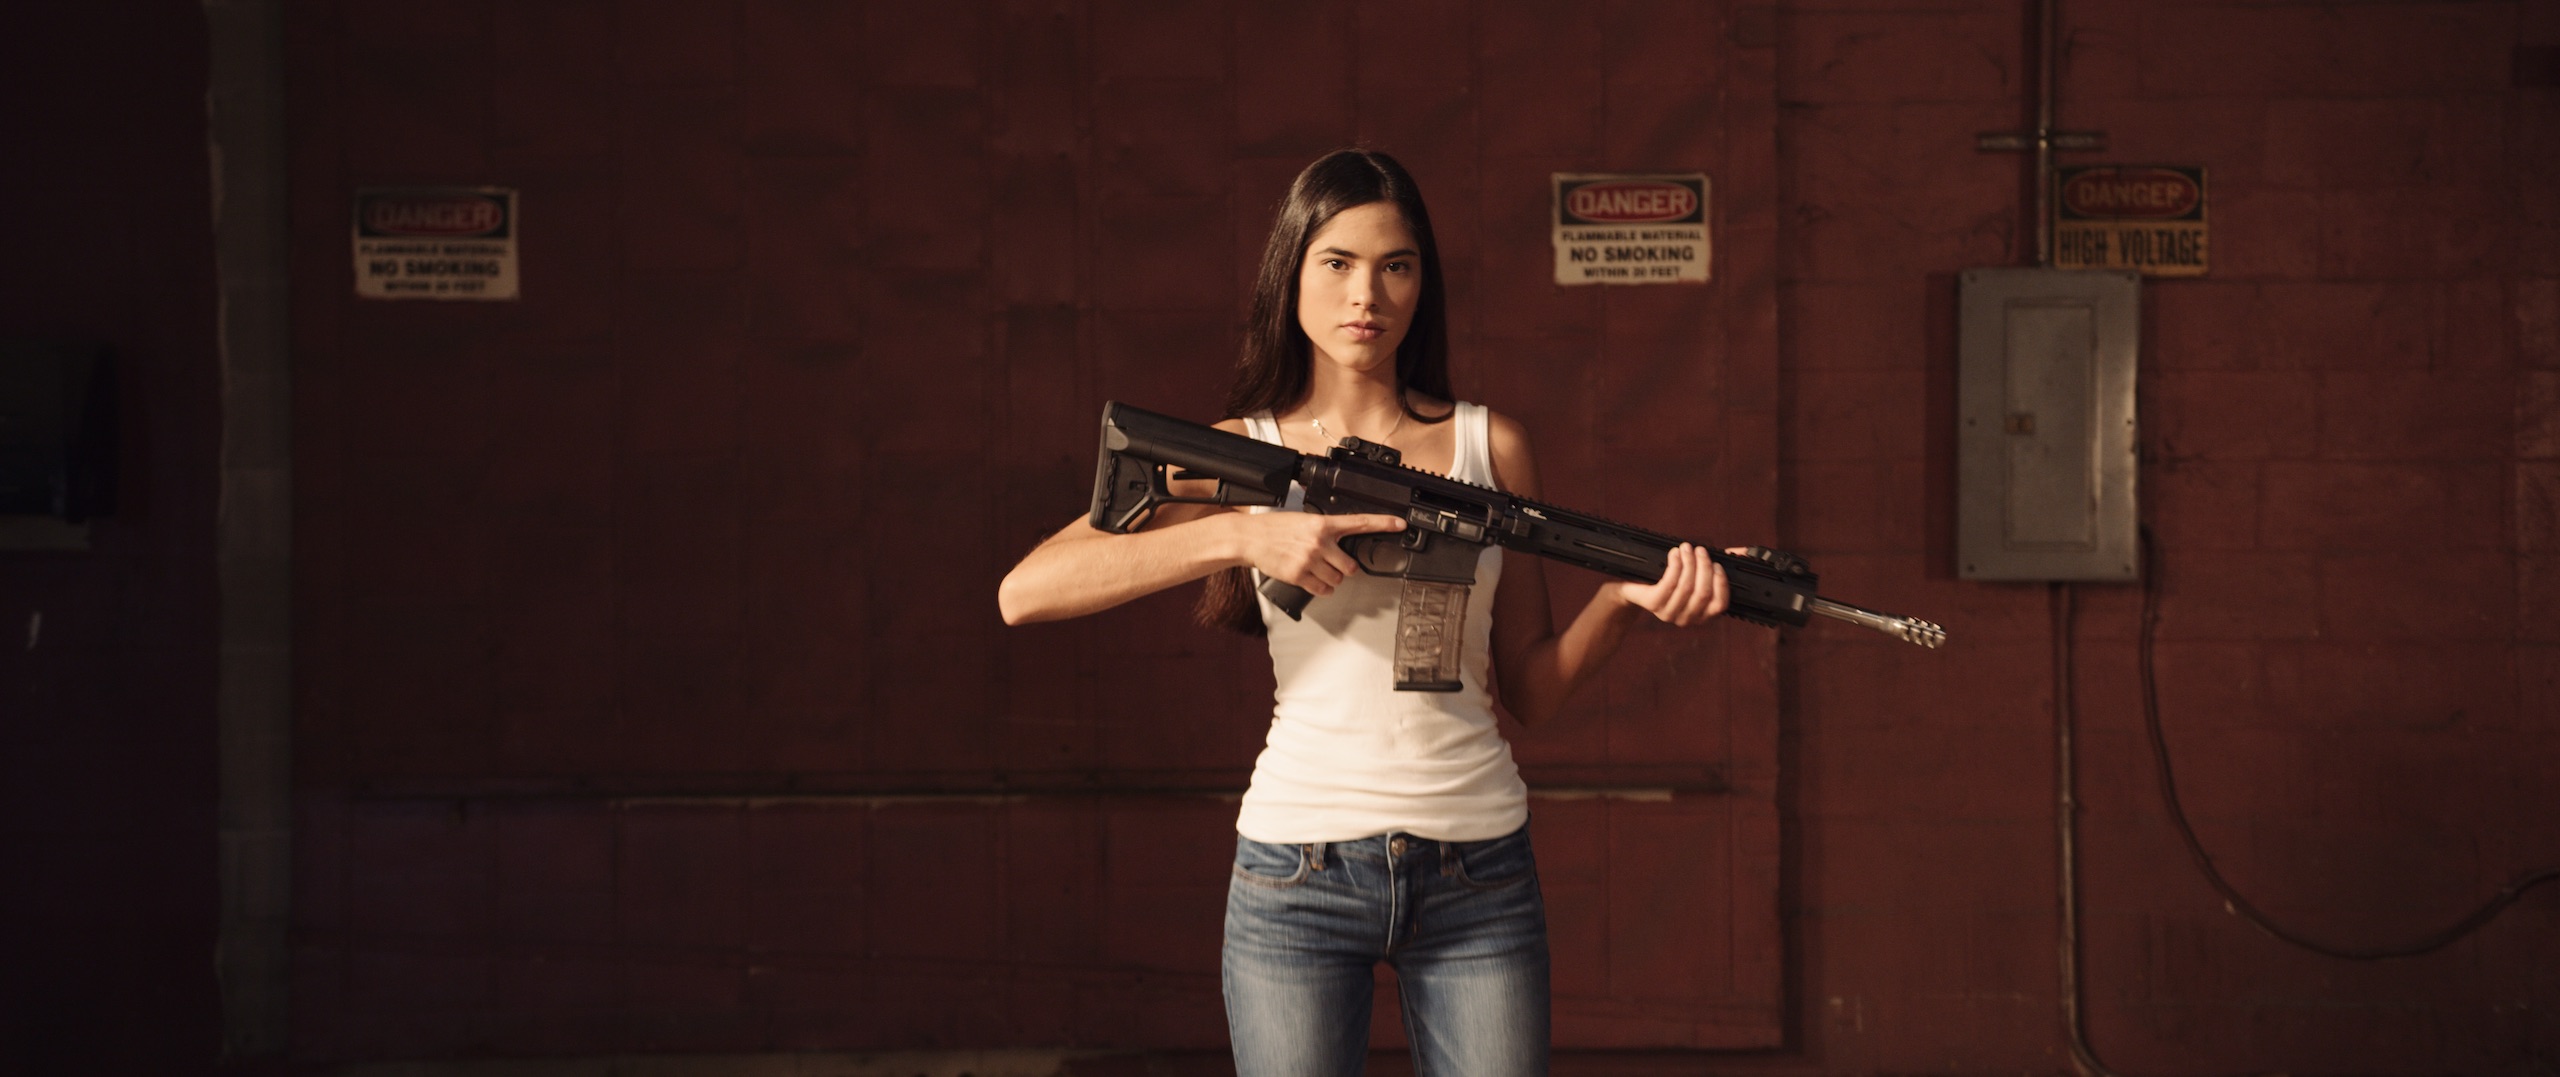 Dailies Political season with 76 Words Woman with long brown hair wearing a white tank top and jeans holding a rifle in a studio